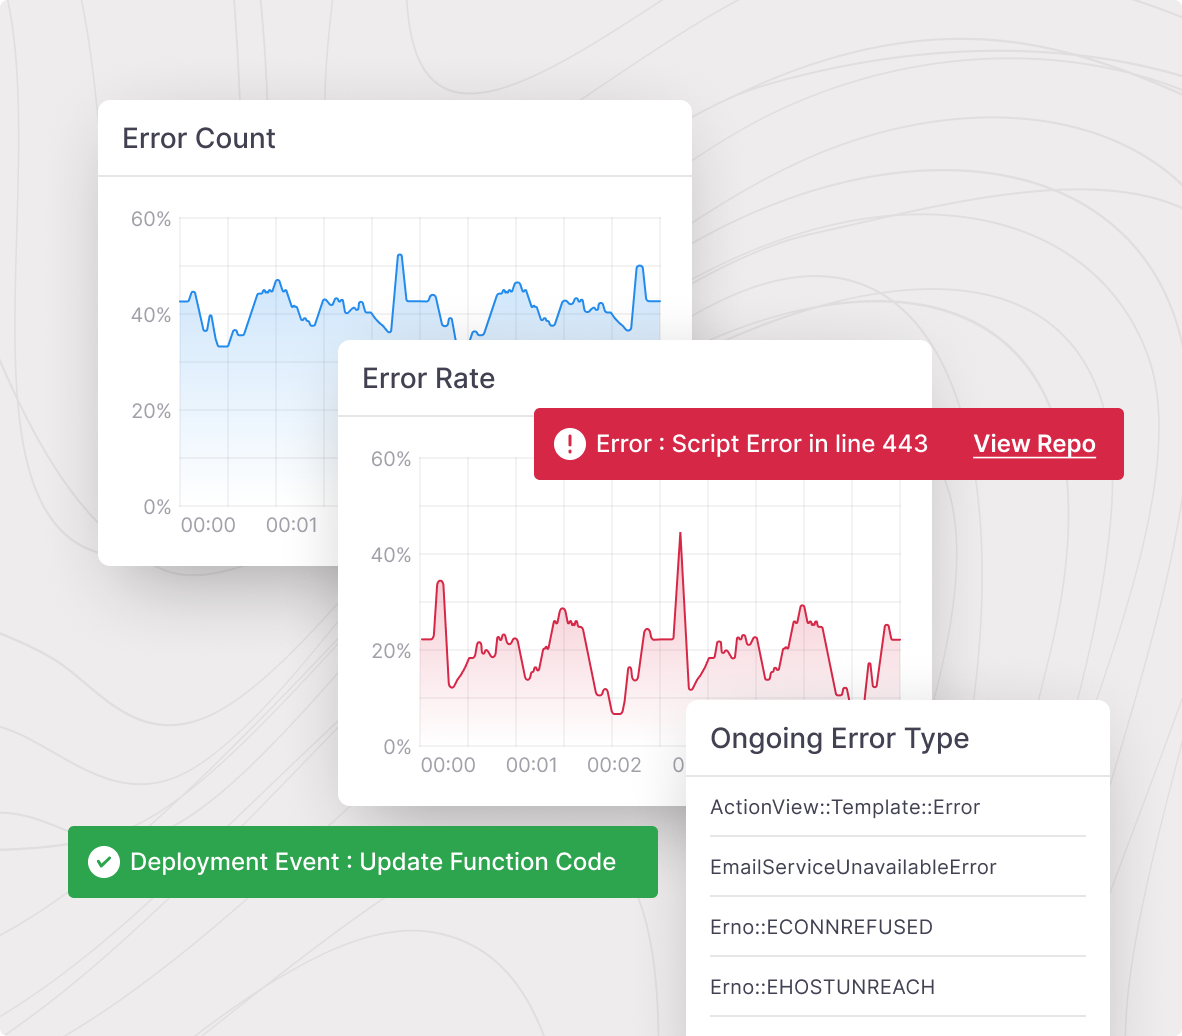 Detect infrastructure issues in real-time, gather insights, and analyze deployments